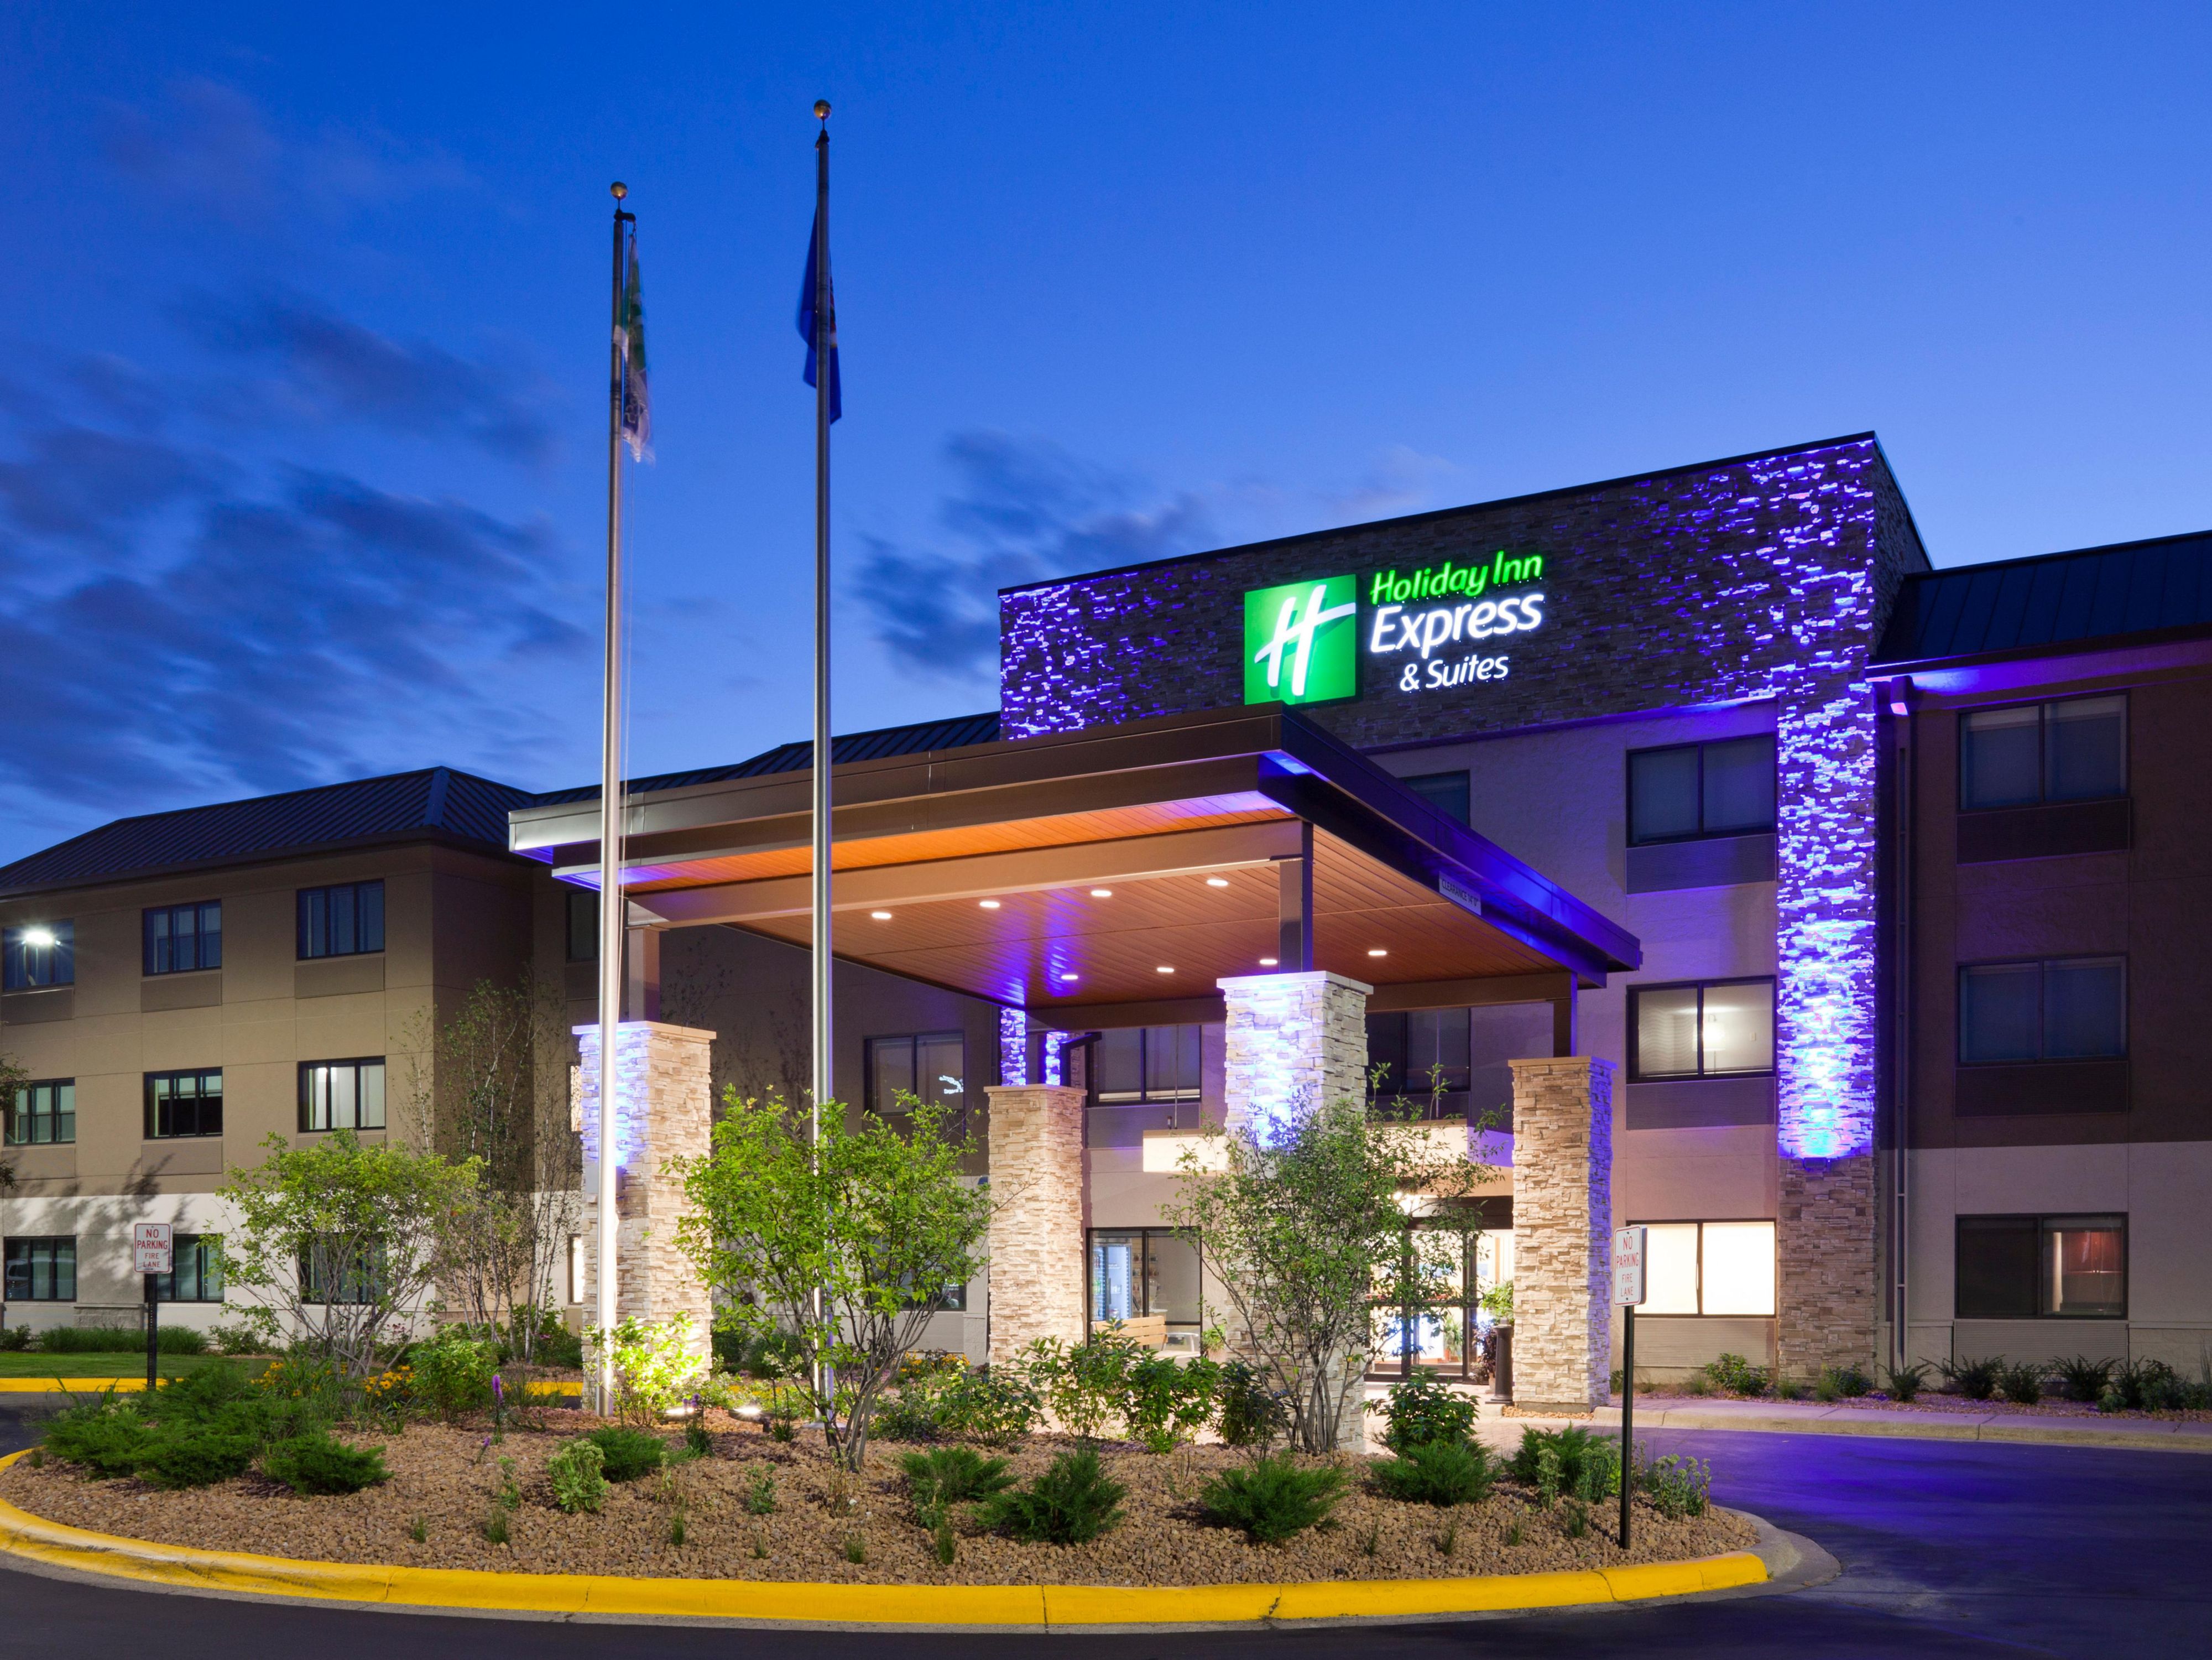 Holiday Inn Express And Suites Minneapolis 4042848653 4x3